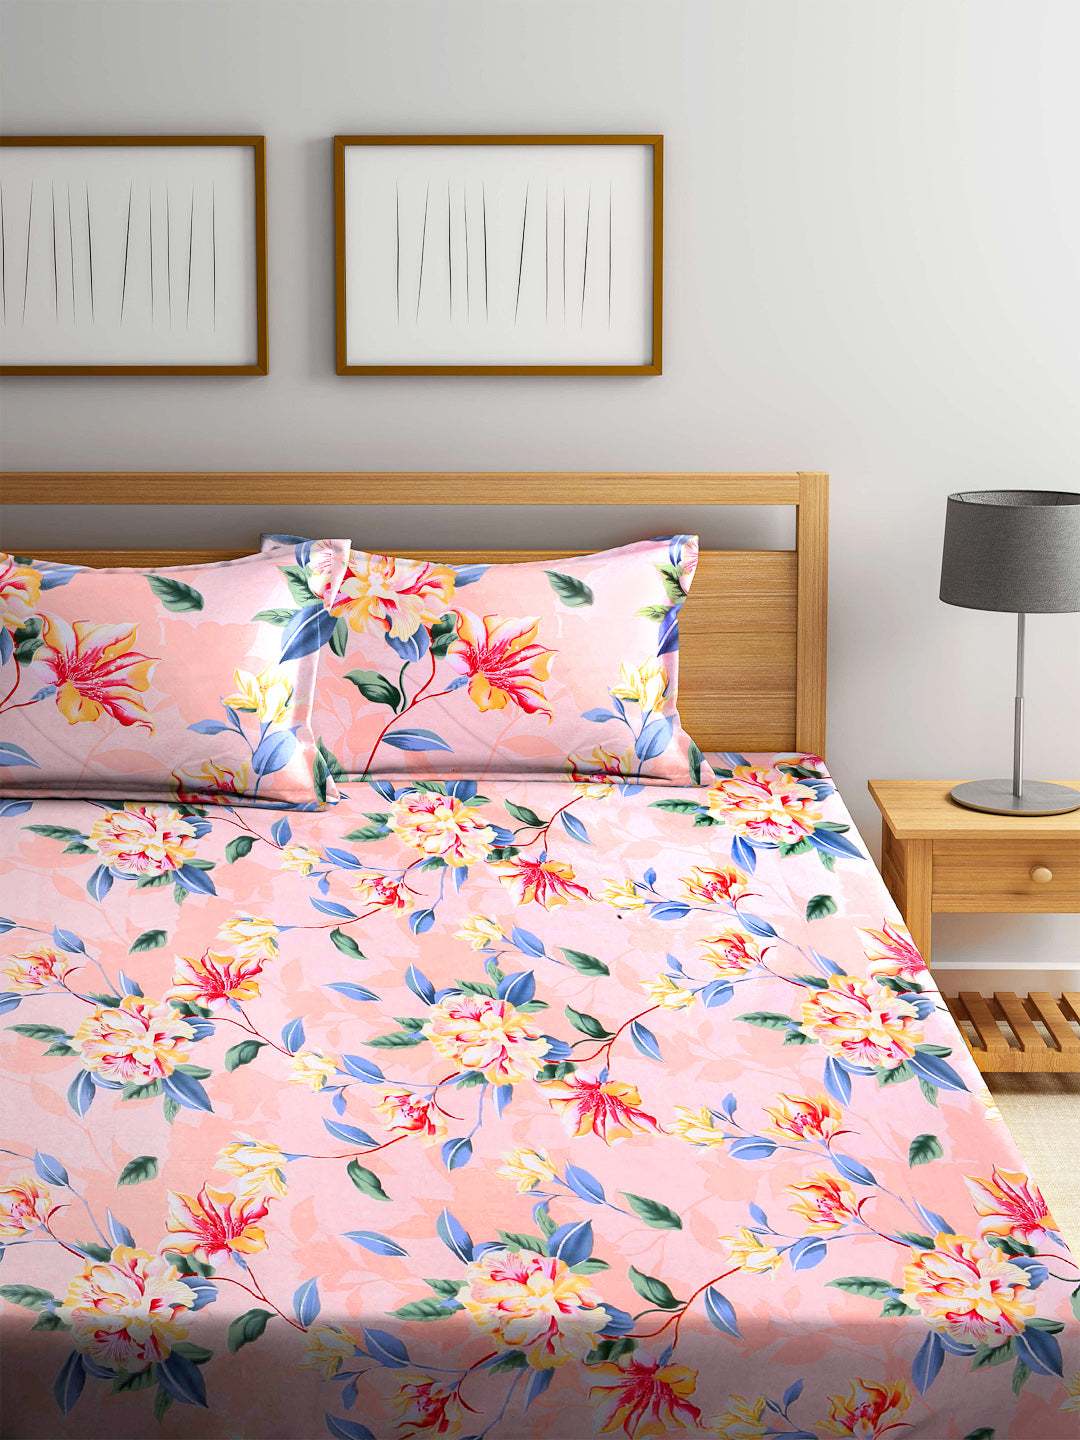 Arrabi Peach Floral TC Cotton Blend Super King Size Fitted Bedsheet with 2 Pillow Covers(270 X 260 Cm )